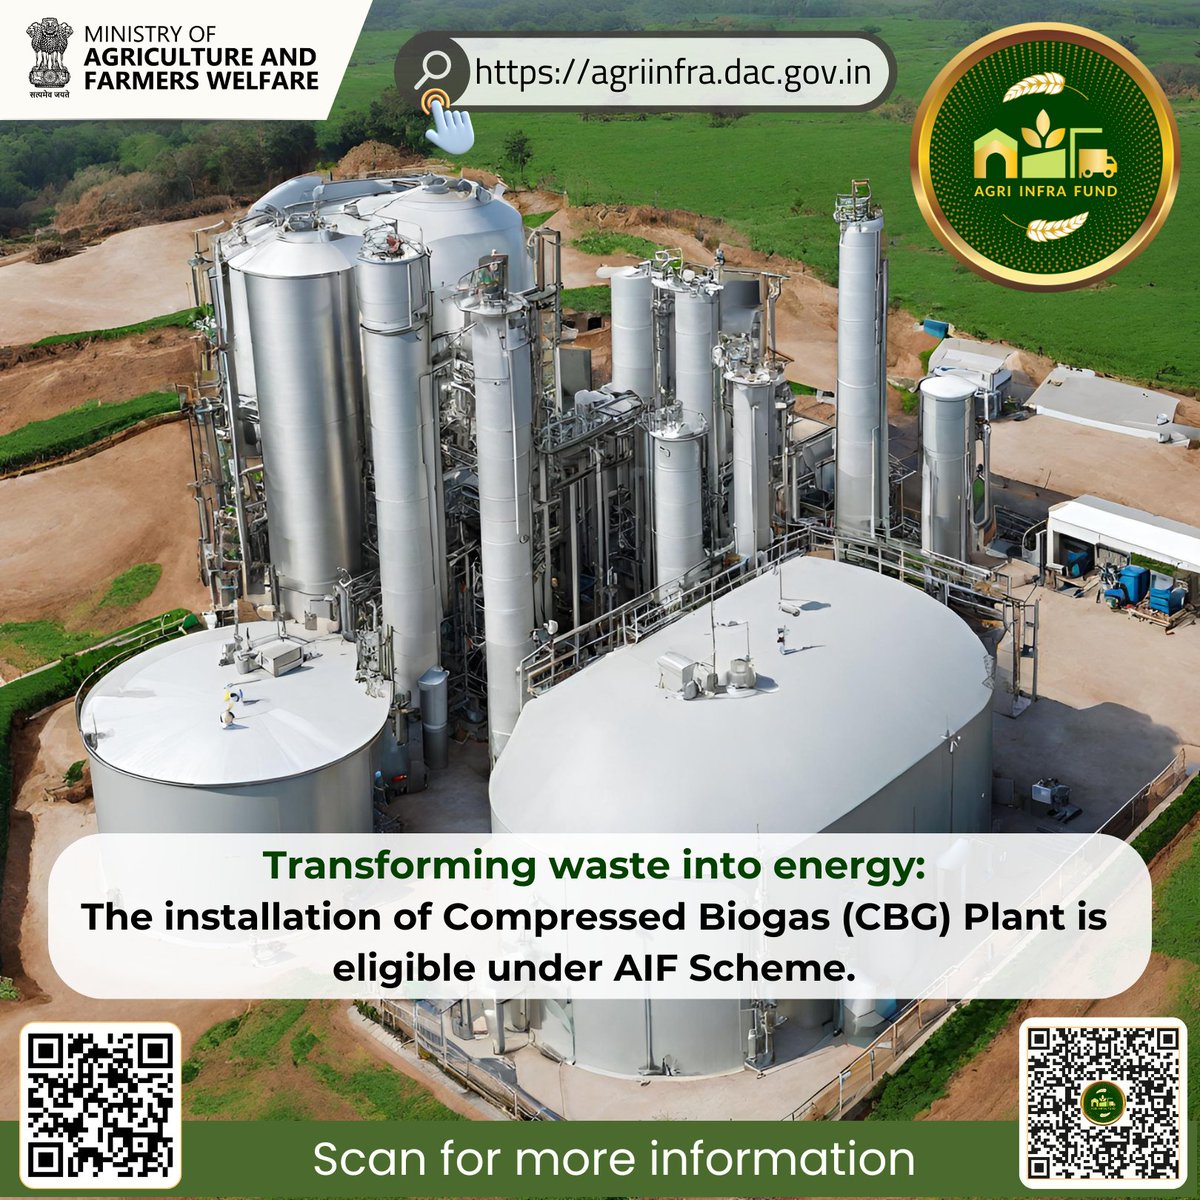 Unlock a sustainable tomorrow! Installation of compressed biogas (CBG) plant is eligible under @agriinfrafund scheme. Learn more at agriinfra.dac.gov.in. #agriinfrafund #agrigoi #greenFuture #renewableEnergy #biogas #sustainability #cbgplant #compressedbiogasplant